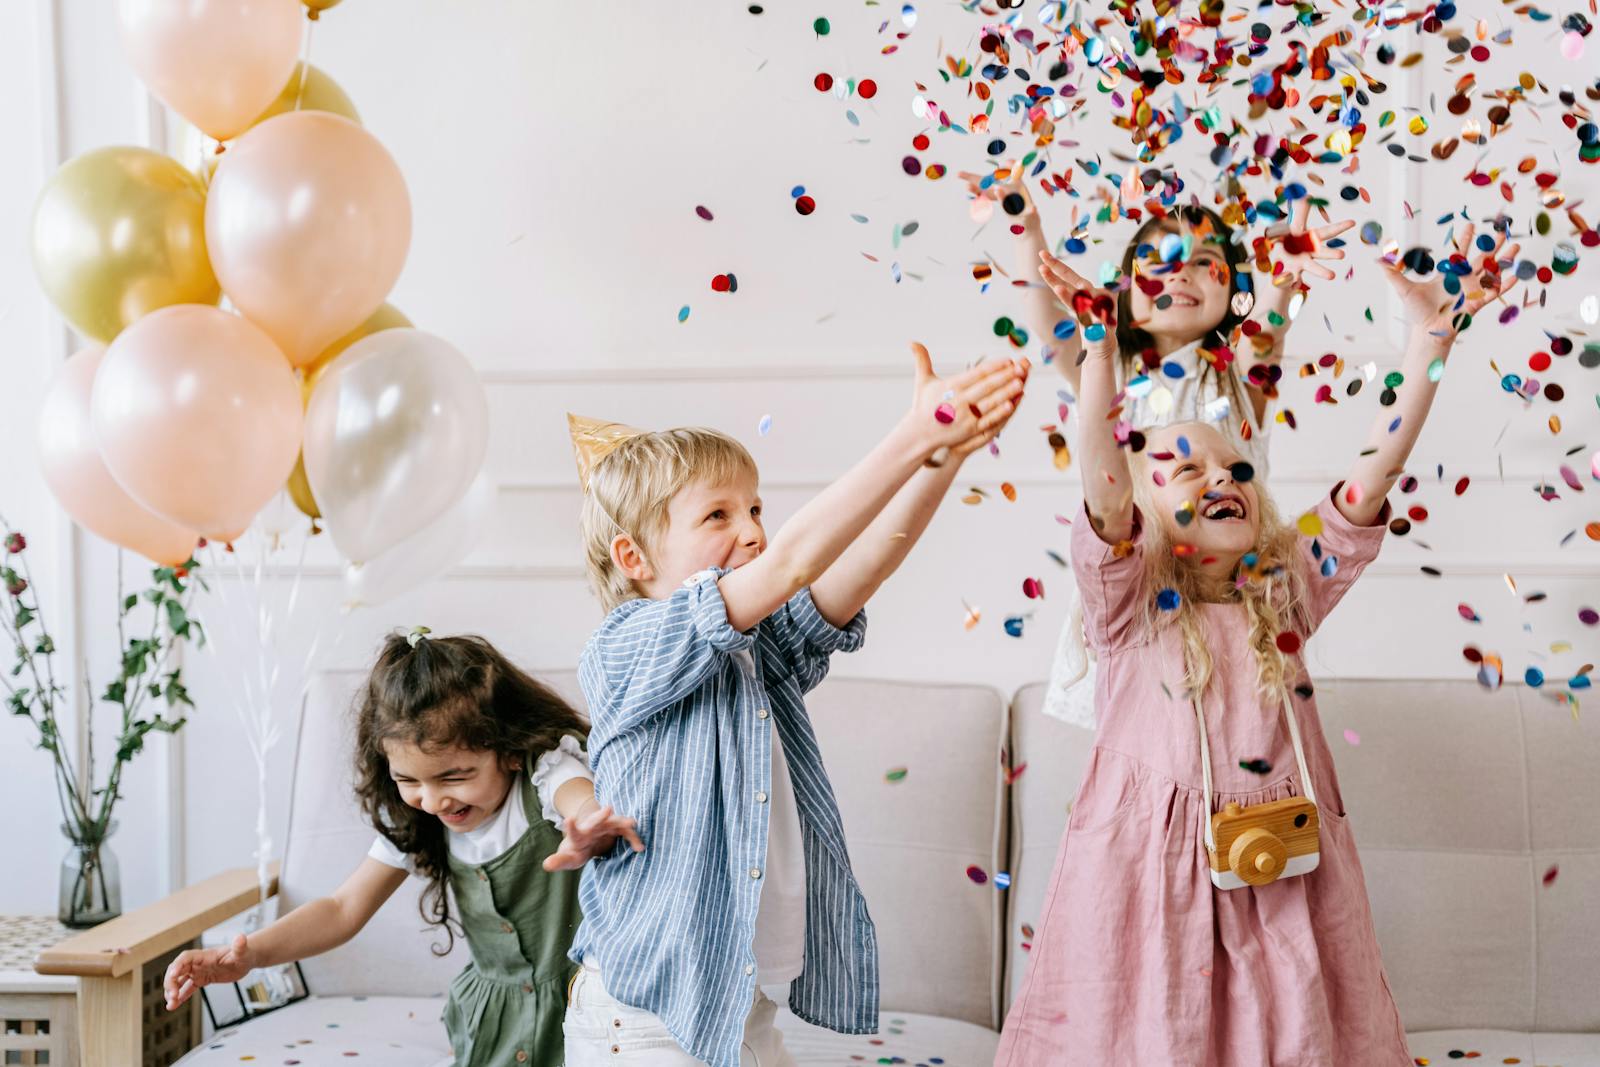 A Children Playing with Confetti in a Party